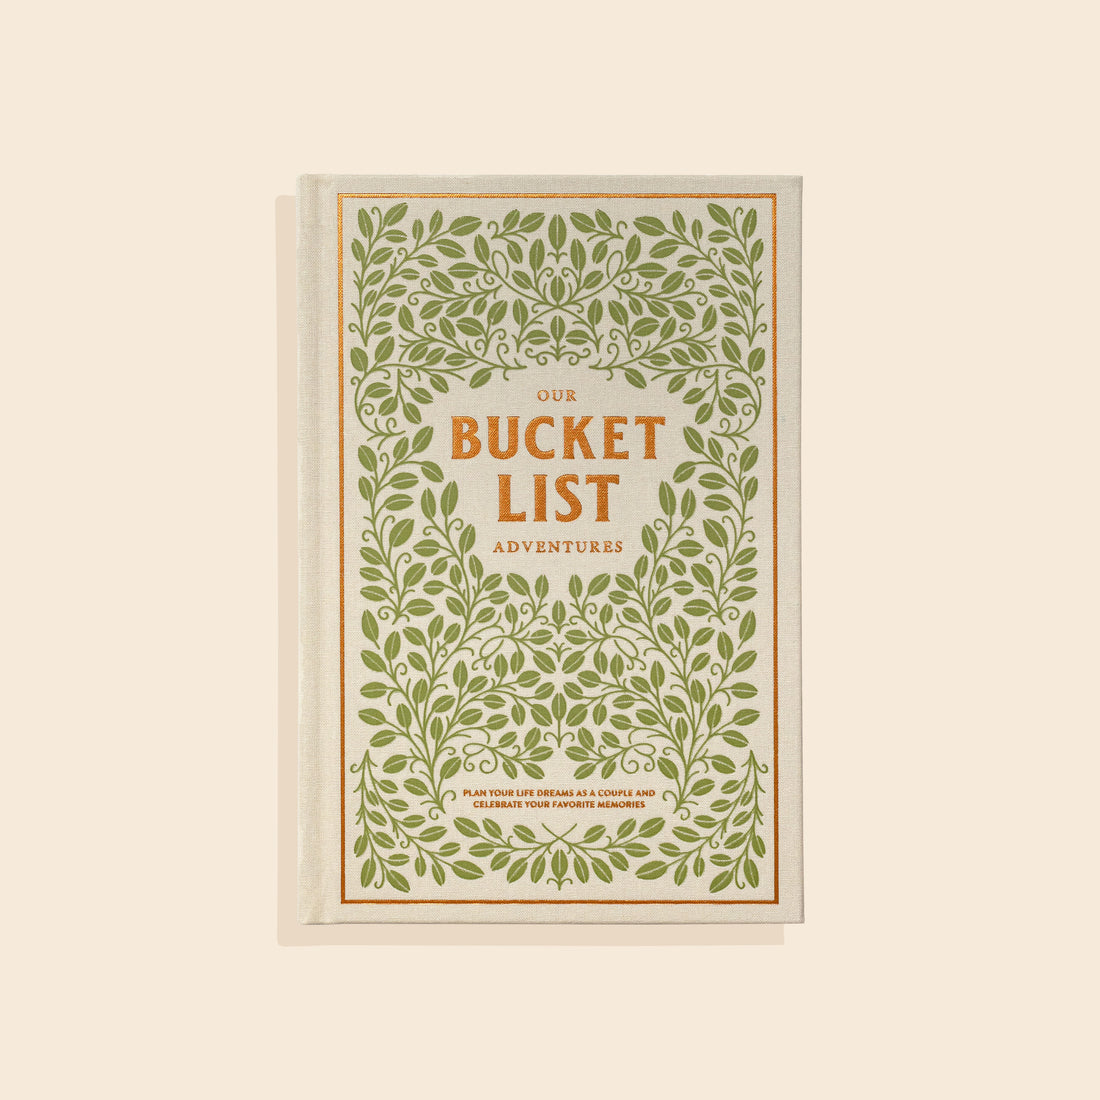 Bucket List Journal Available at Paige Tate and Co